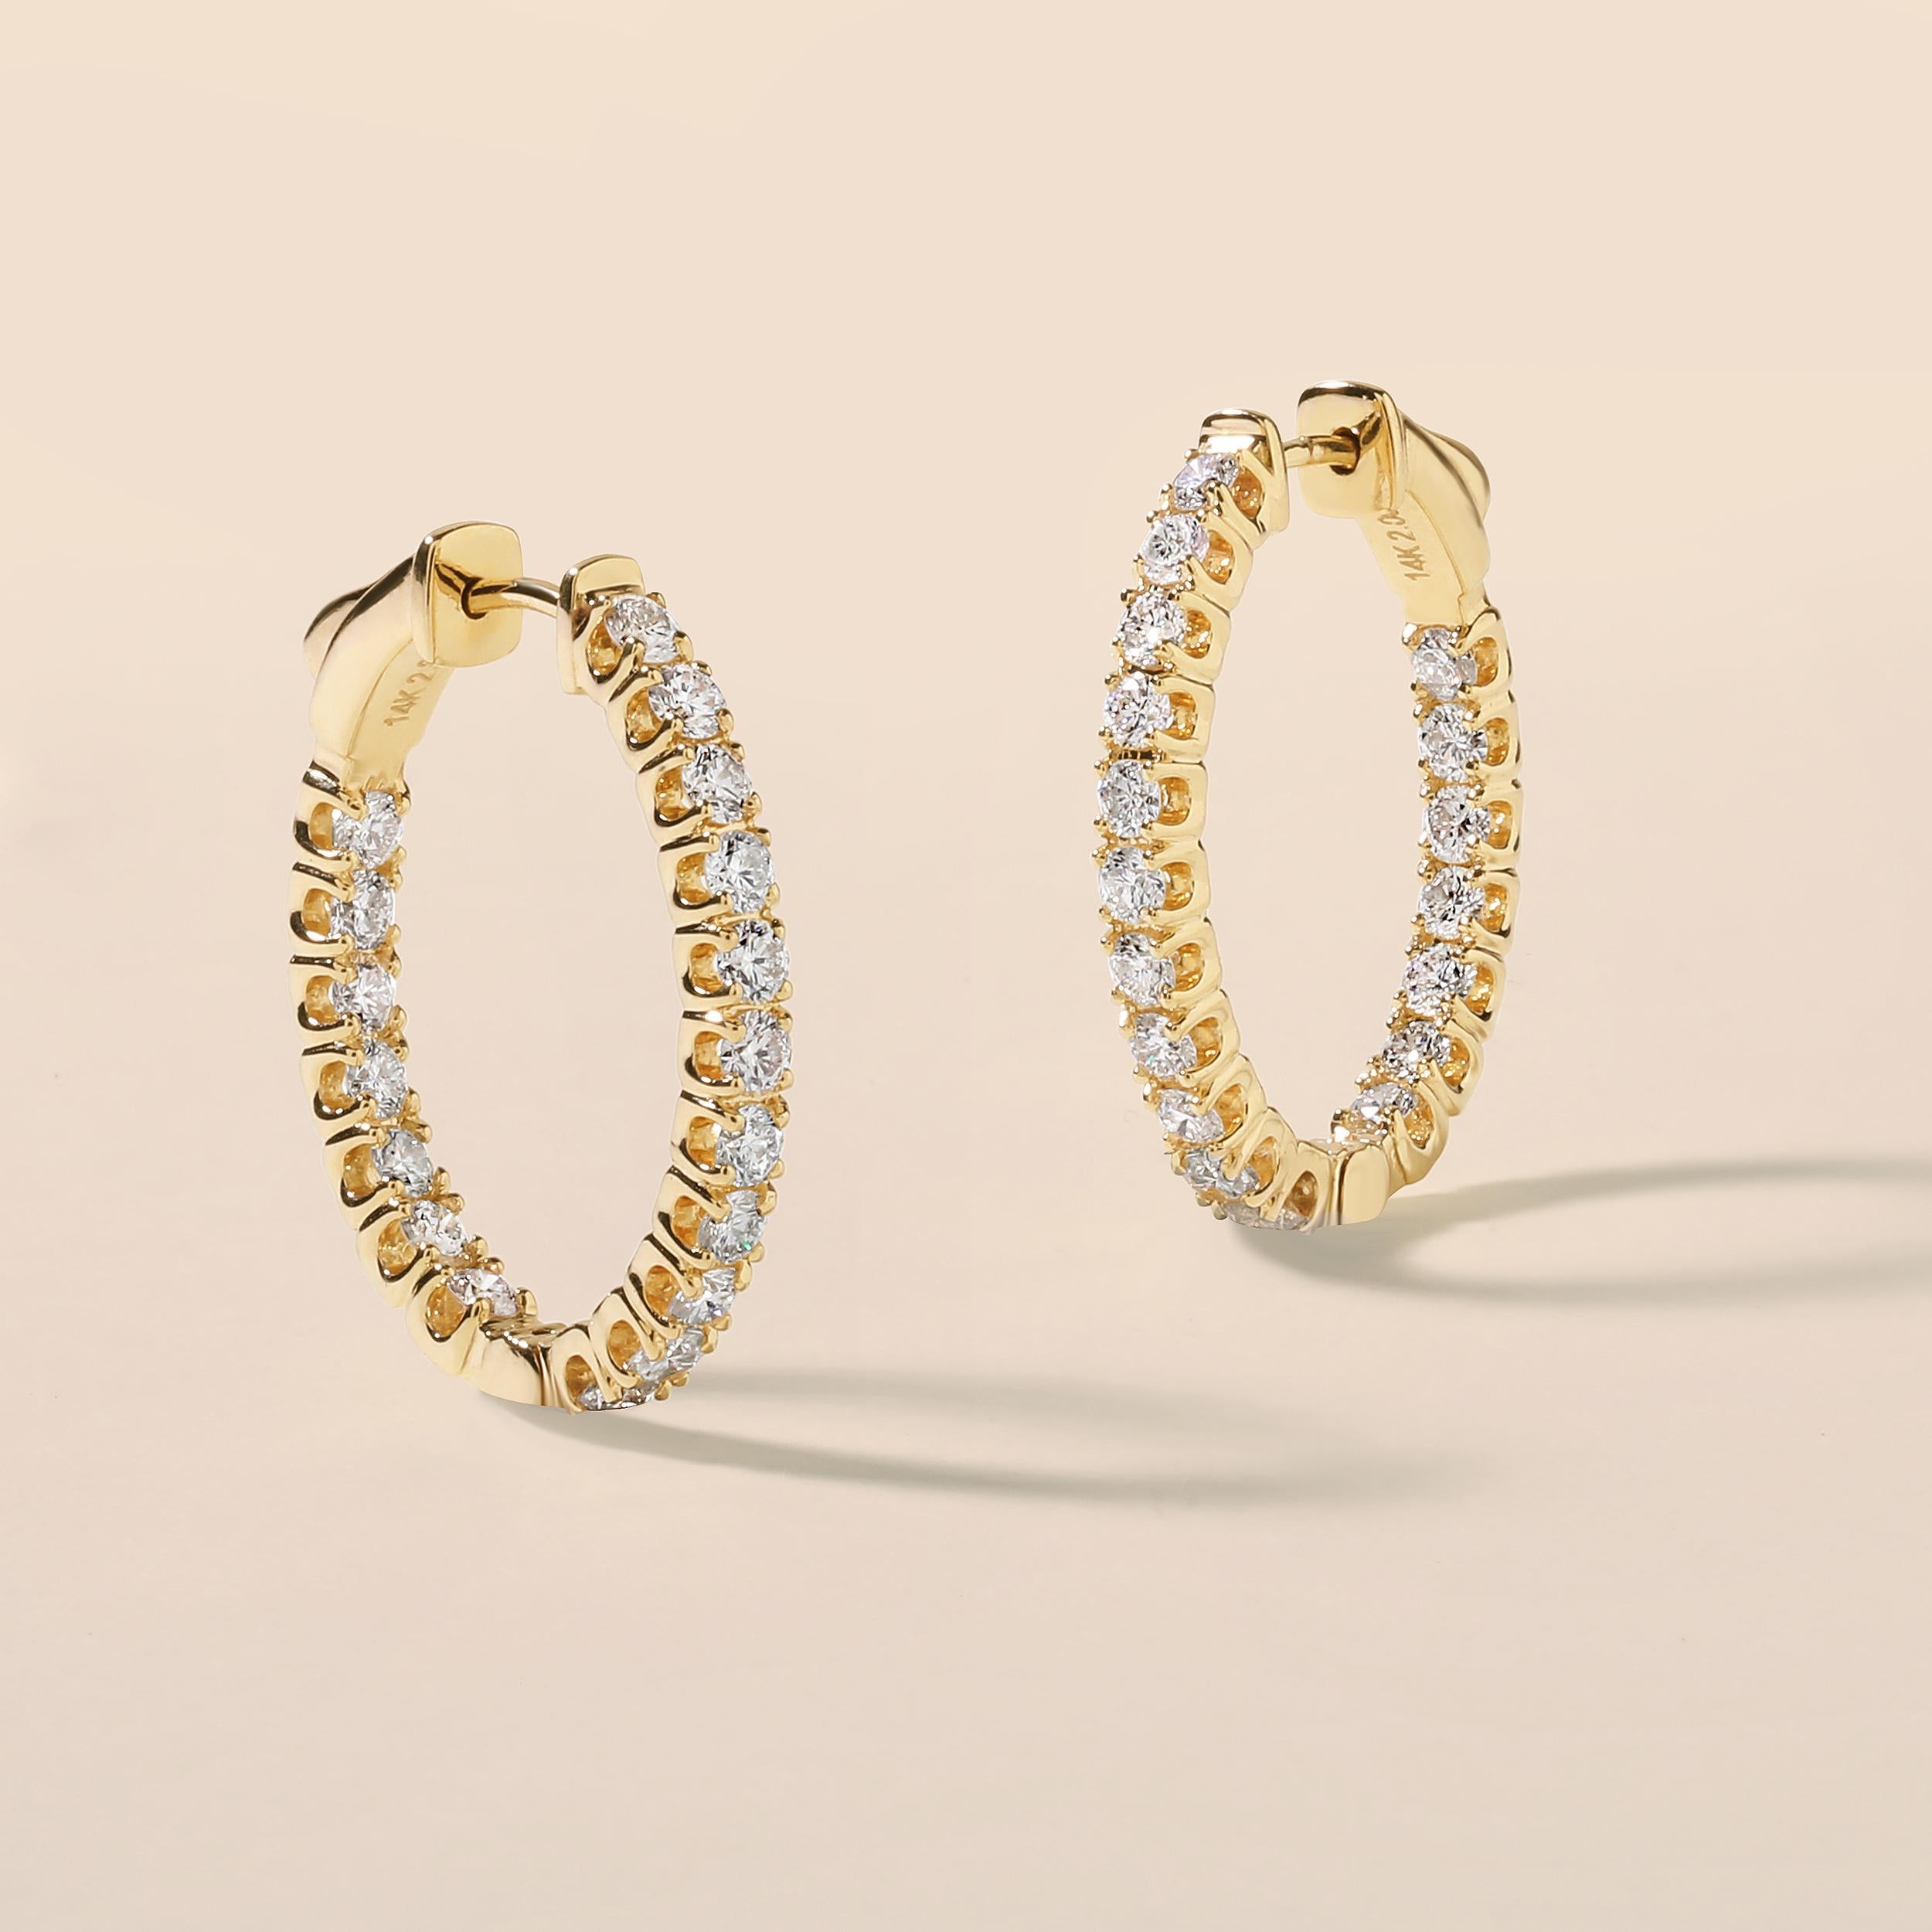 Crafted in 7.55 grams of 14K Yellow Gold, the earrings contains 36 stones of Round Diamonds with a total of 2 carat in G-H color and SI clarity.

This jewelry piece will be expertly crafted by our skilled artisans upon order. Allow us a shipping